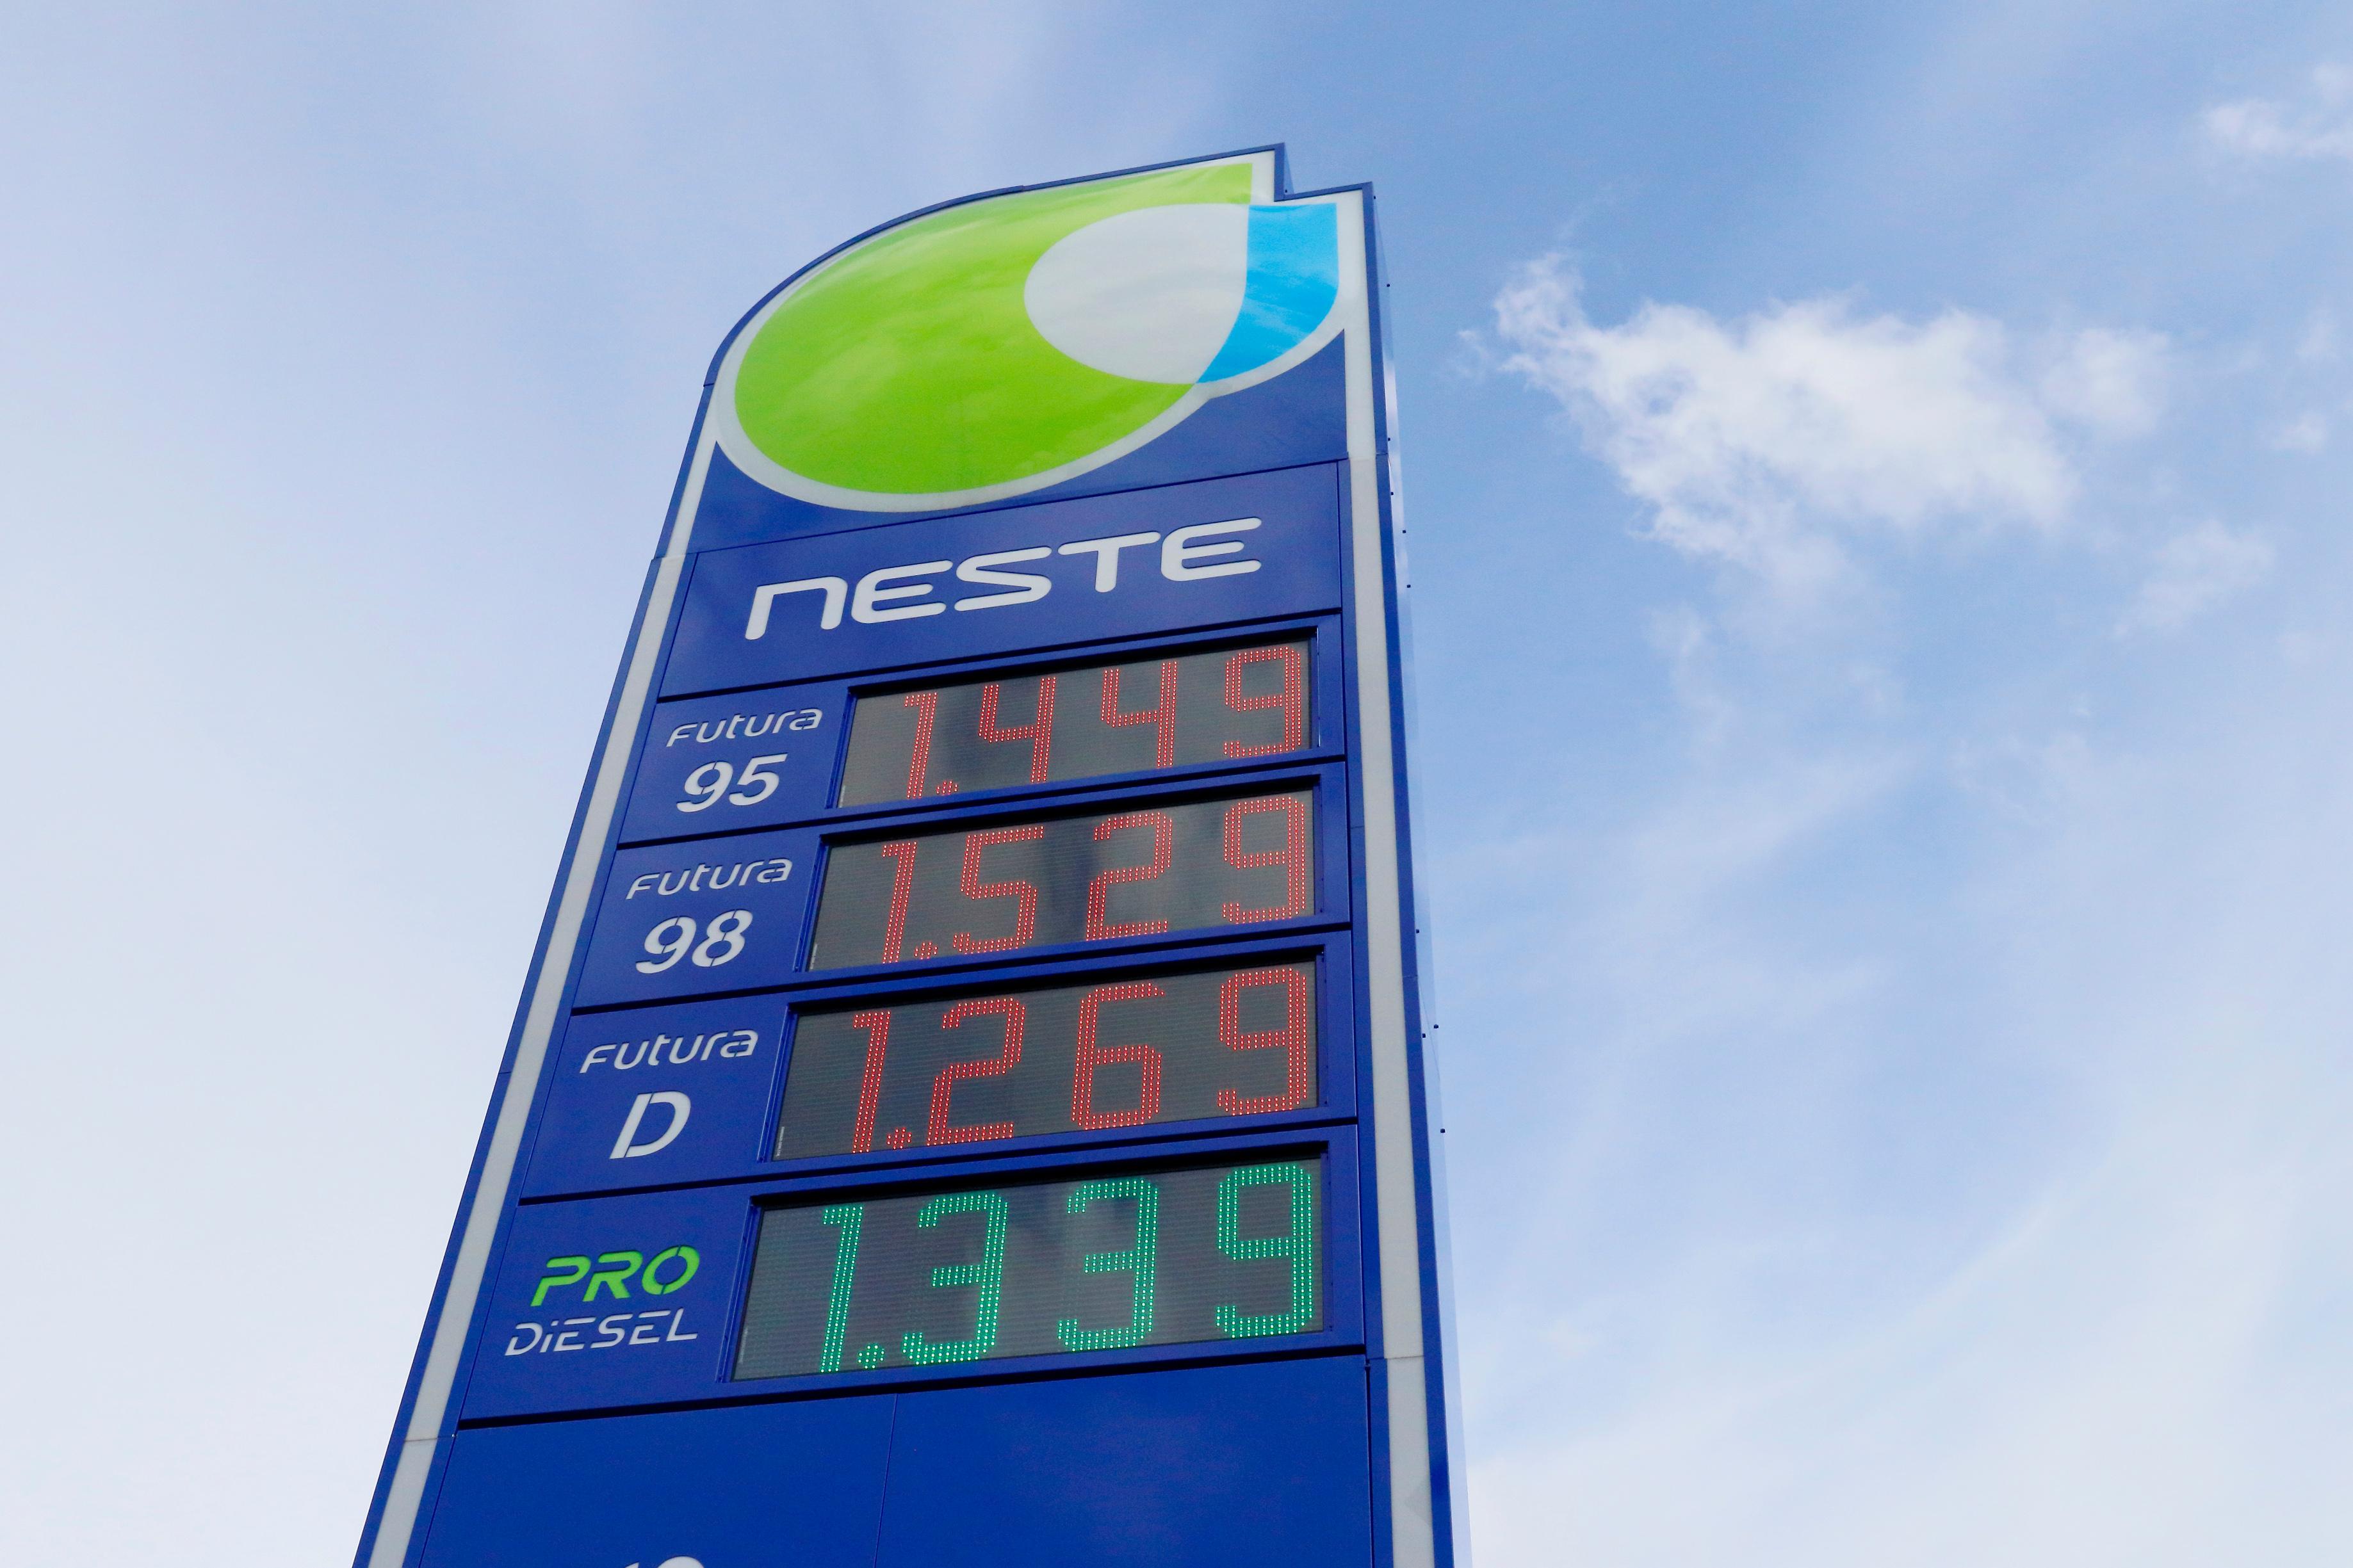 Fuel company Neste is cutting up to 470 jobs, citing declining demand for oil